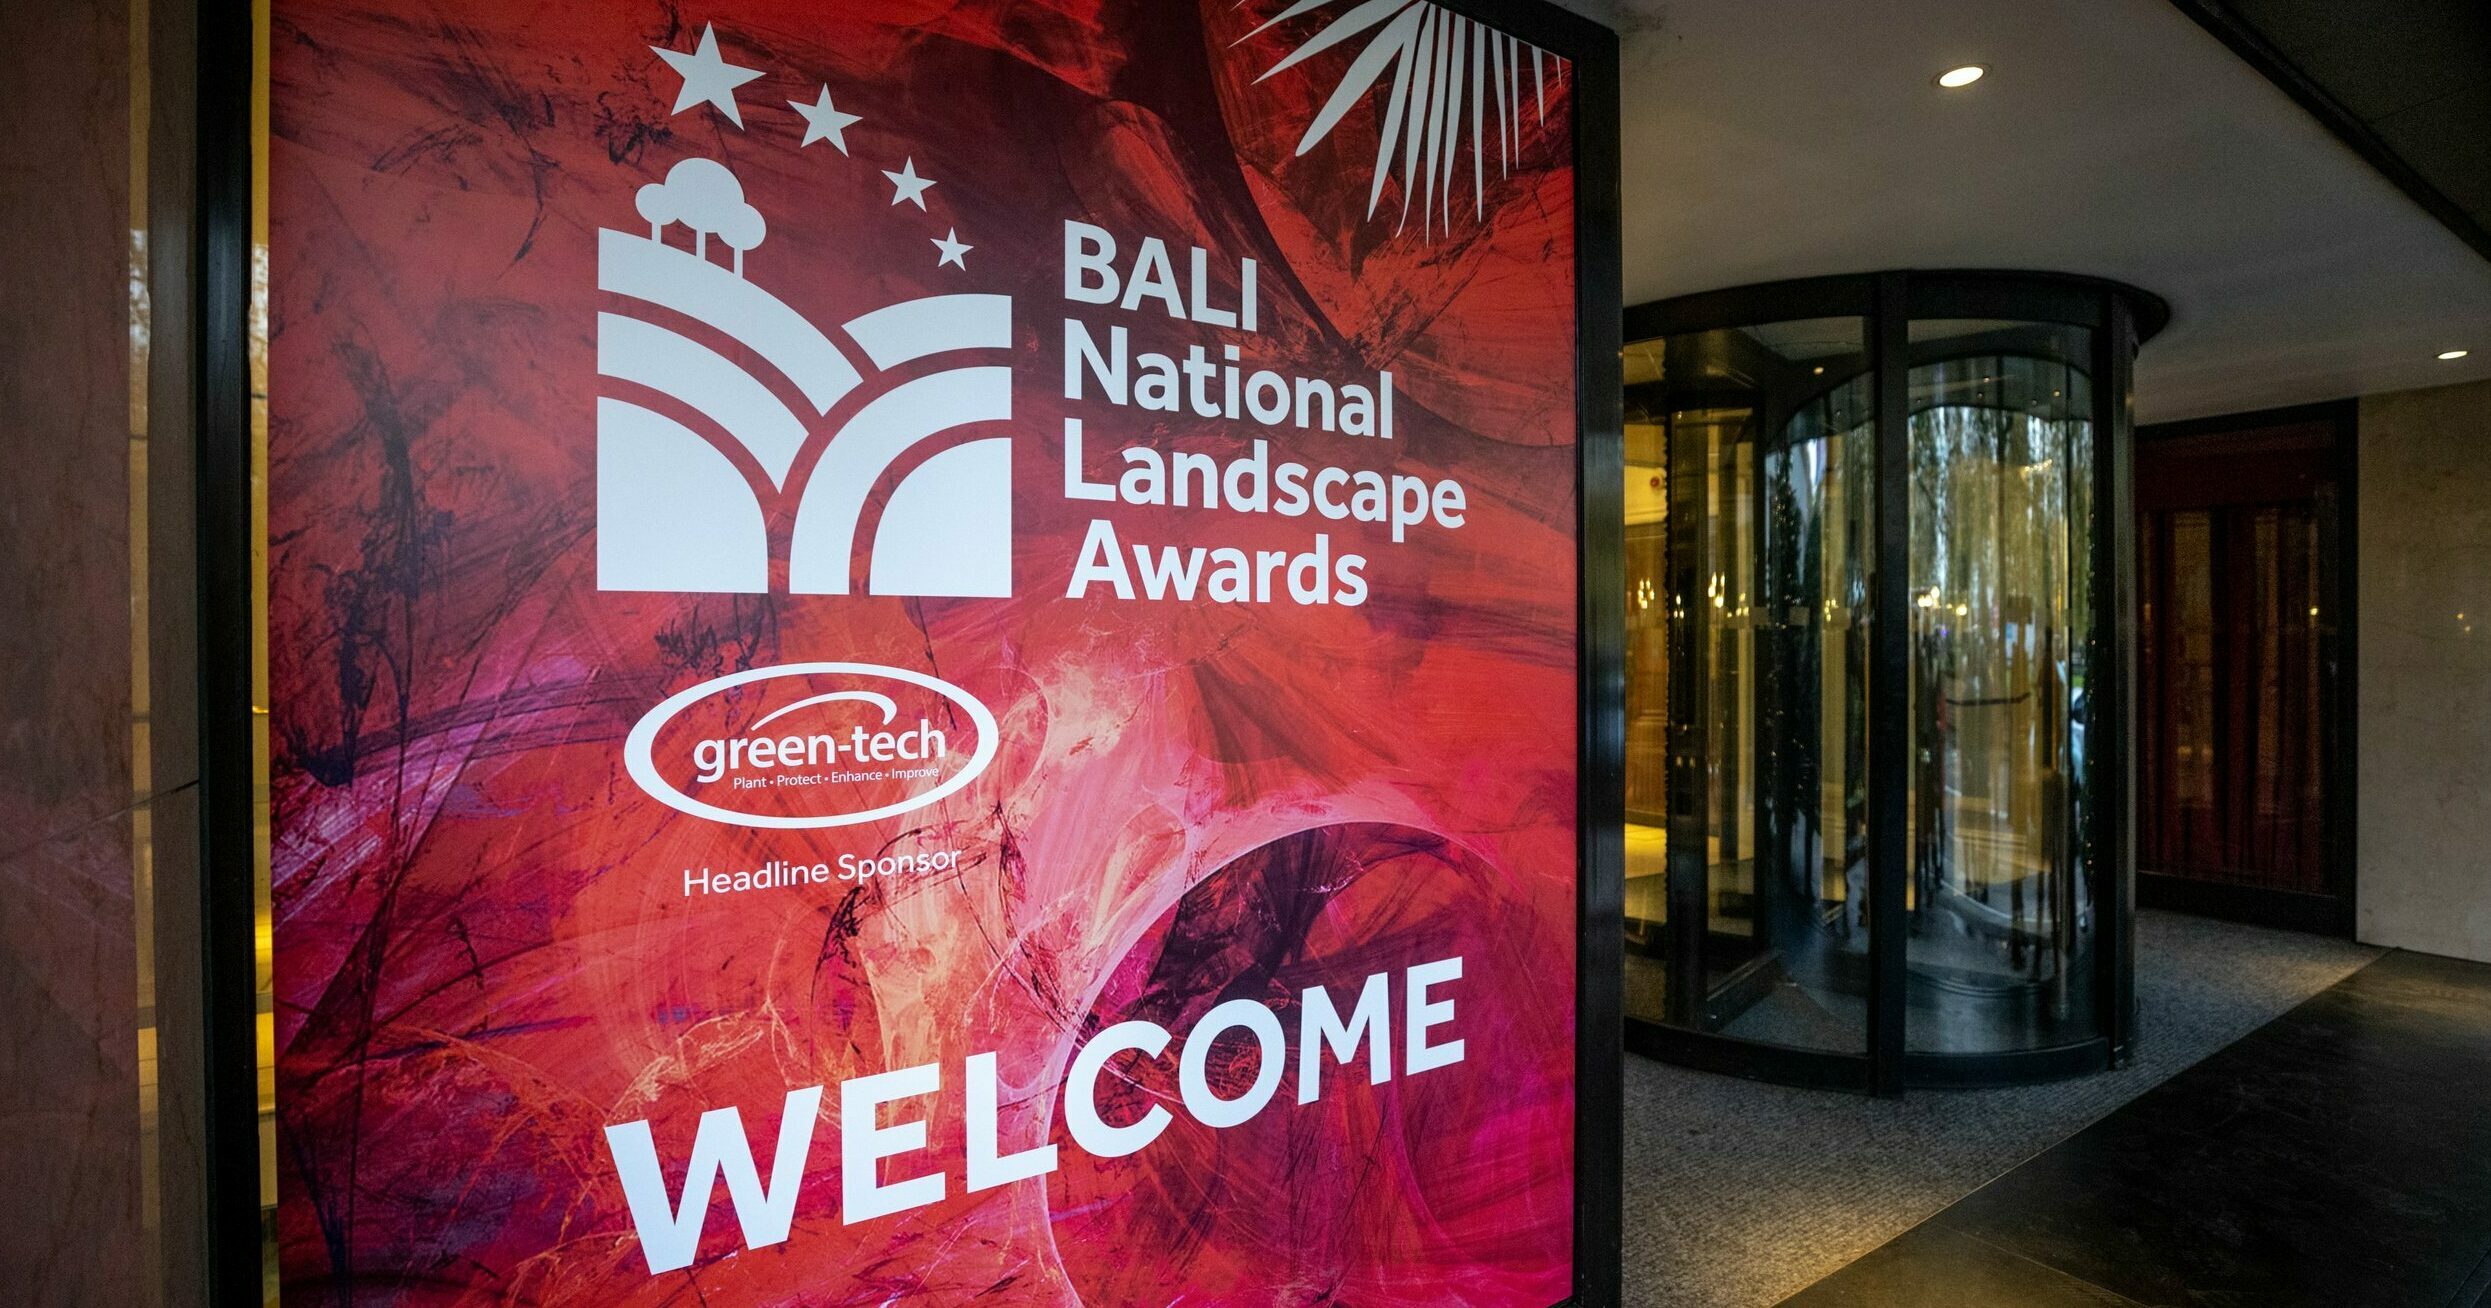 Elevation and Collaboration at the BALI National Landscape Awards